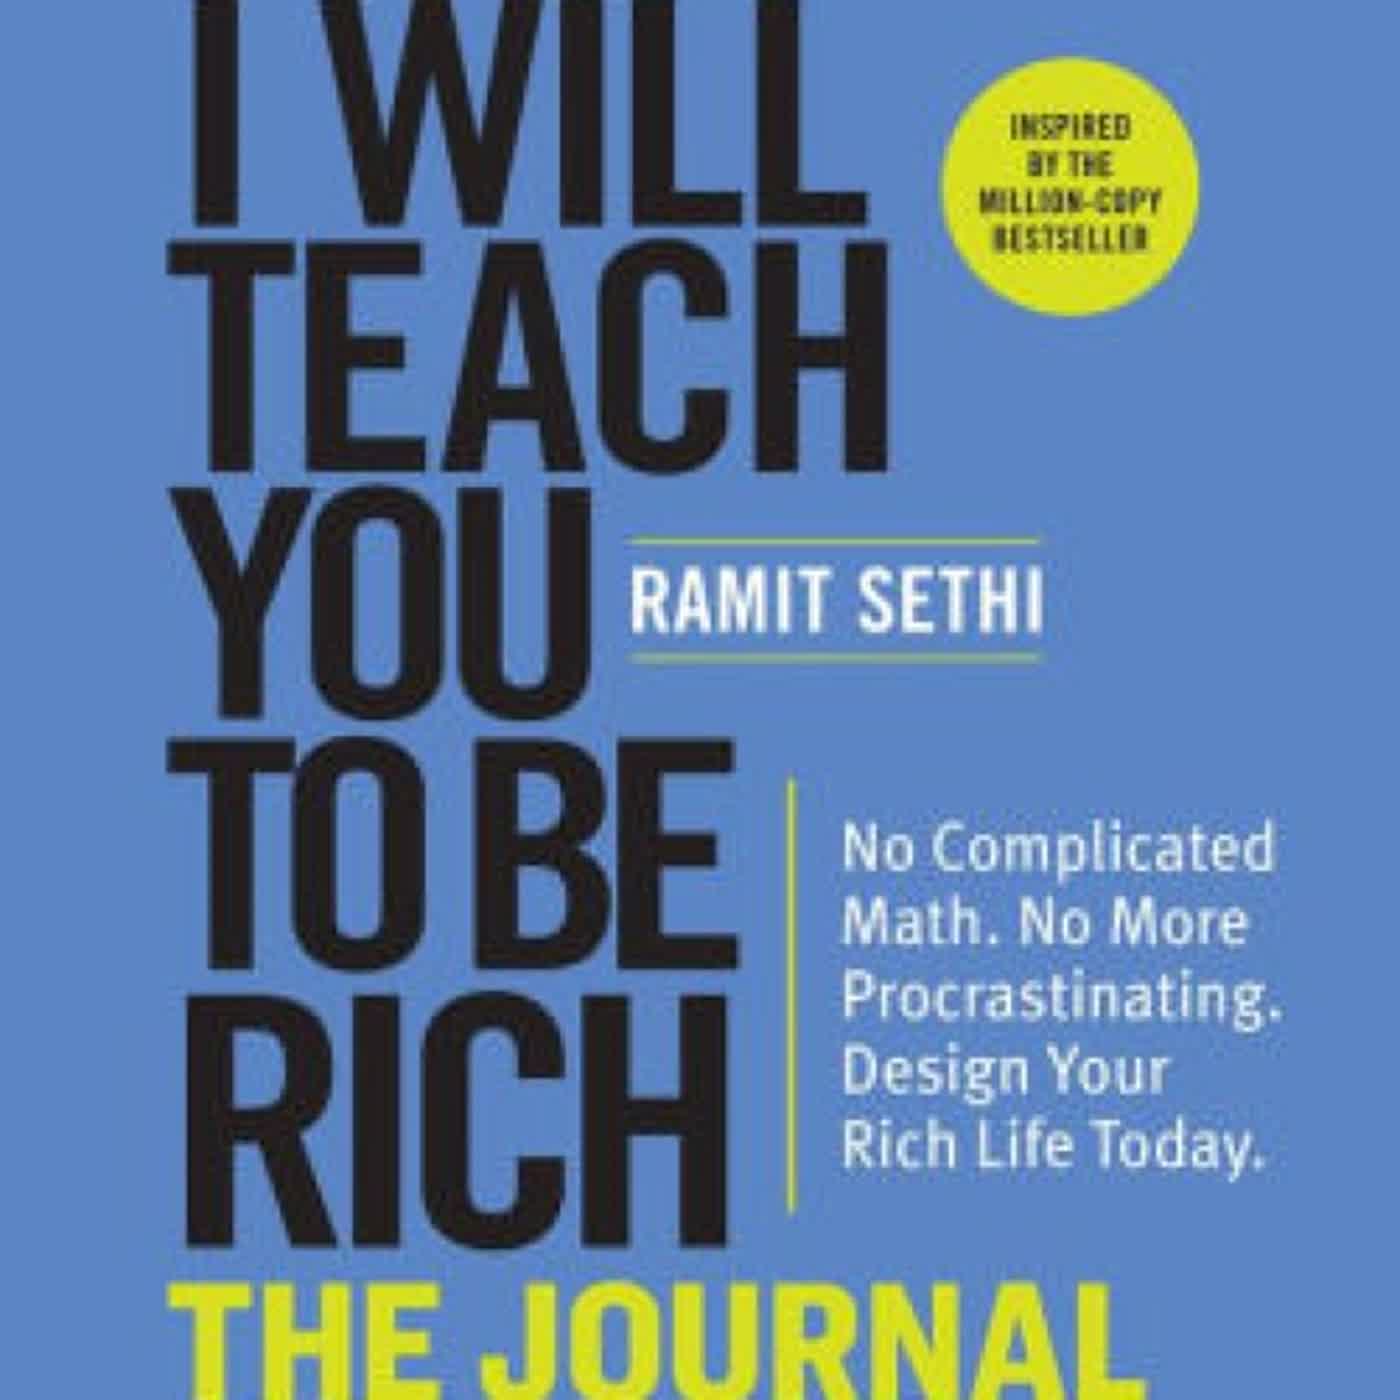 Read [Pdf]> I Will Teach You to Be Rich: The Journal: No Complicated Math. No More Procrastinating. Design Your Rich Life Today. by Ramit Sethi